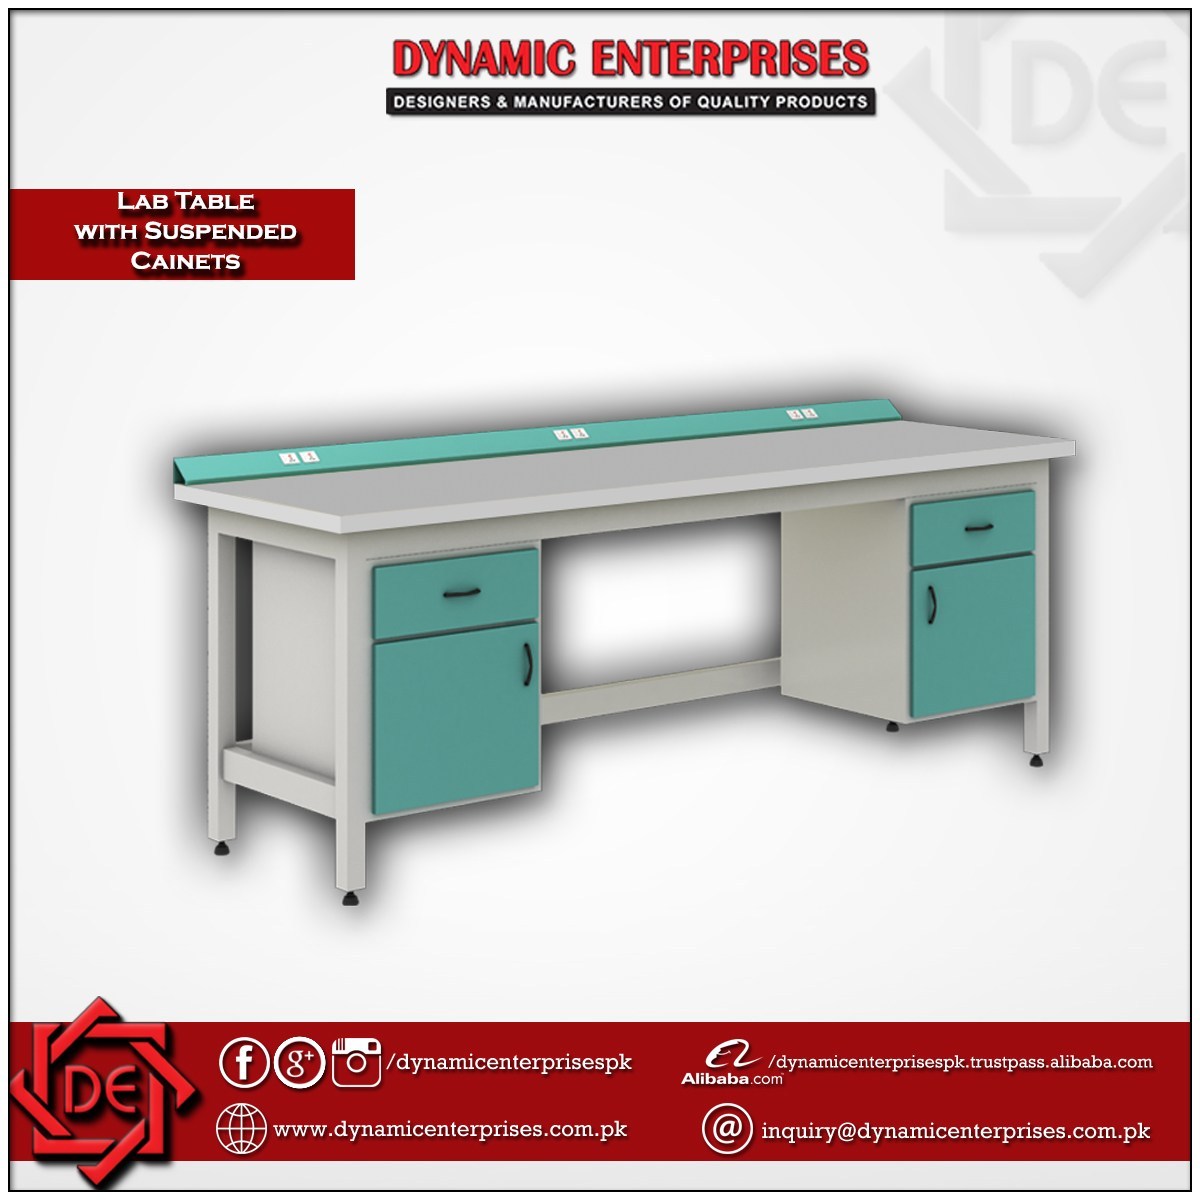 Laboratory Table with Suspended Cabinets & Electrical Panel